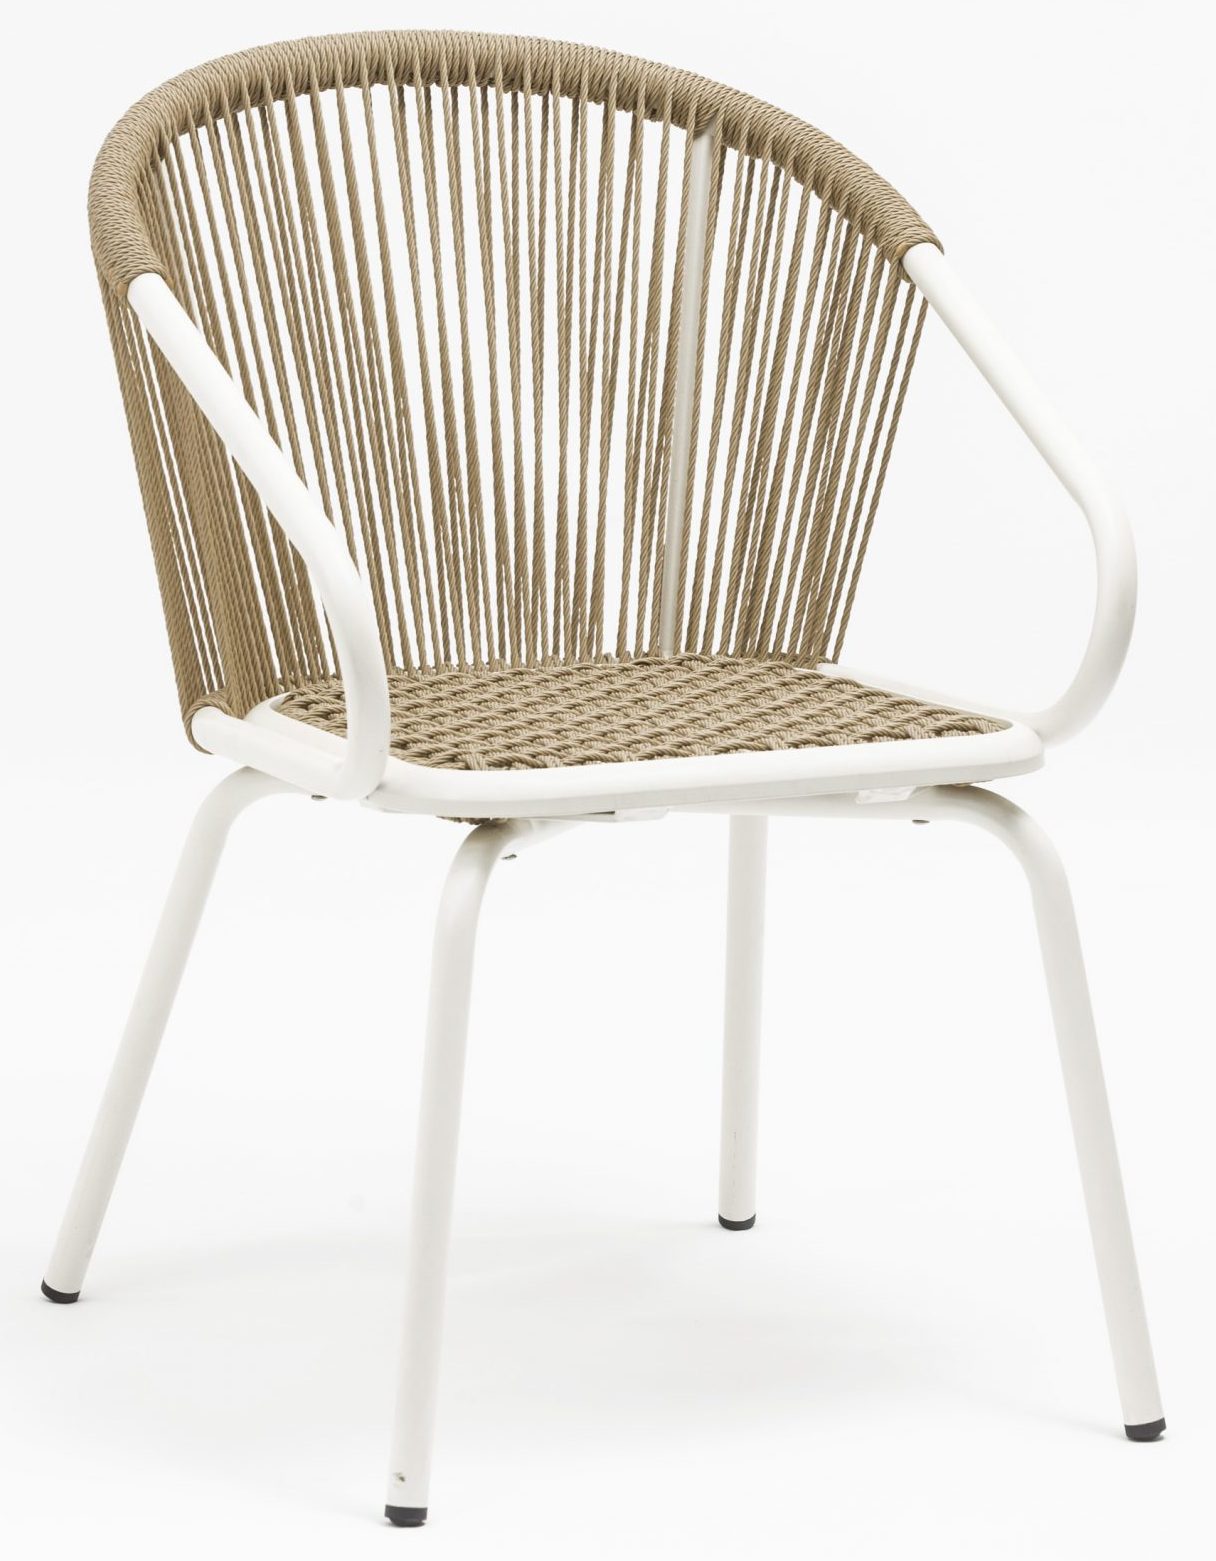 Cardiff Armchair | Outdoor Chairs | Cafe Furniture Company